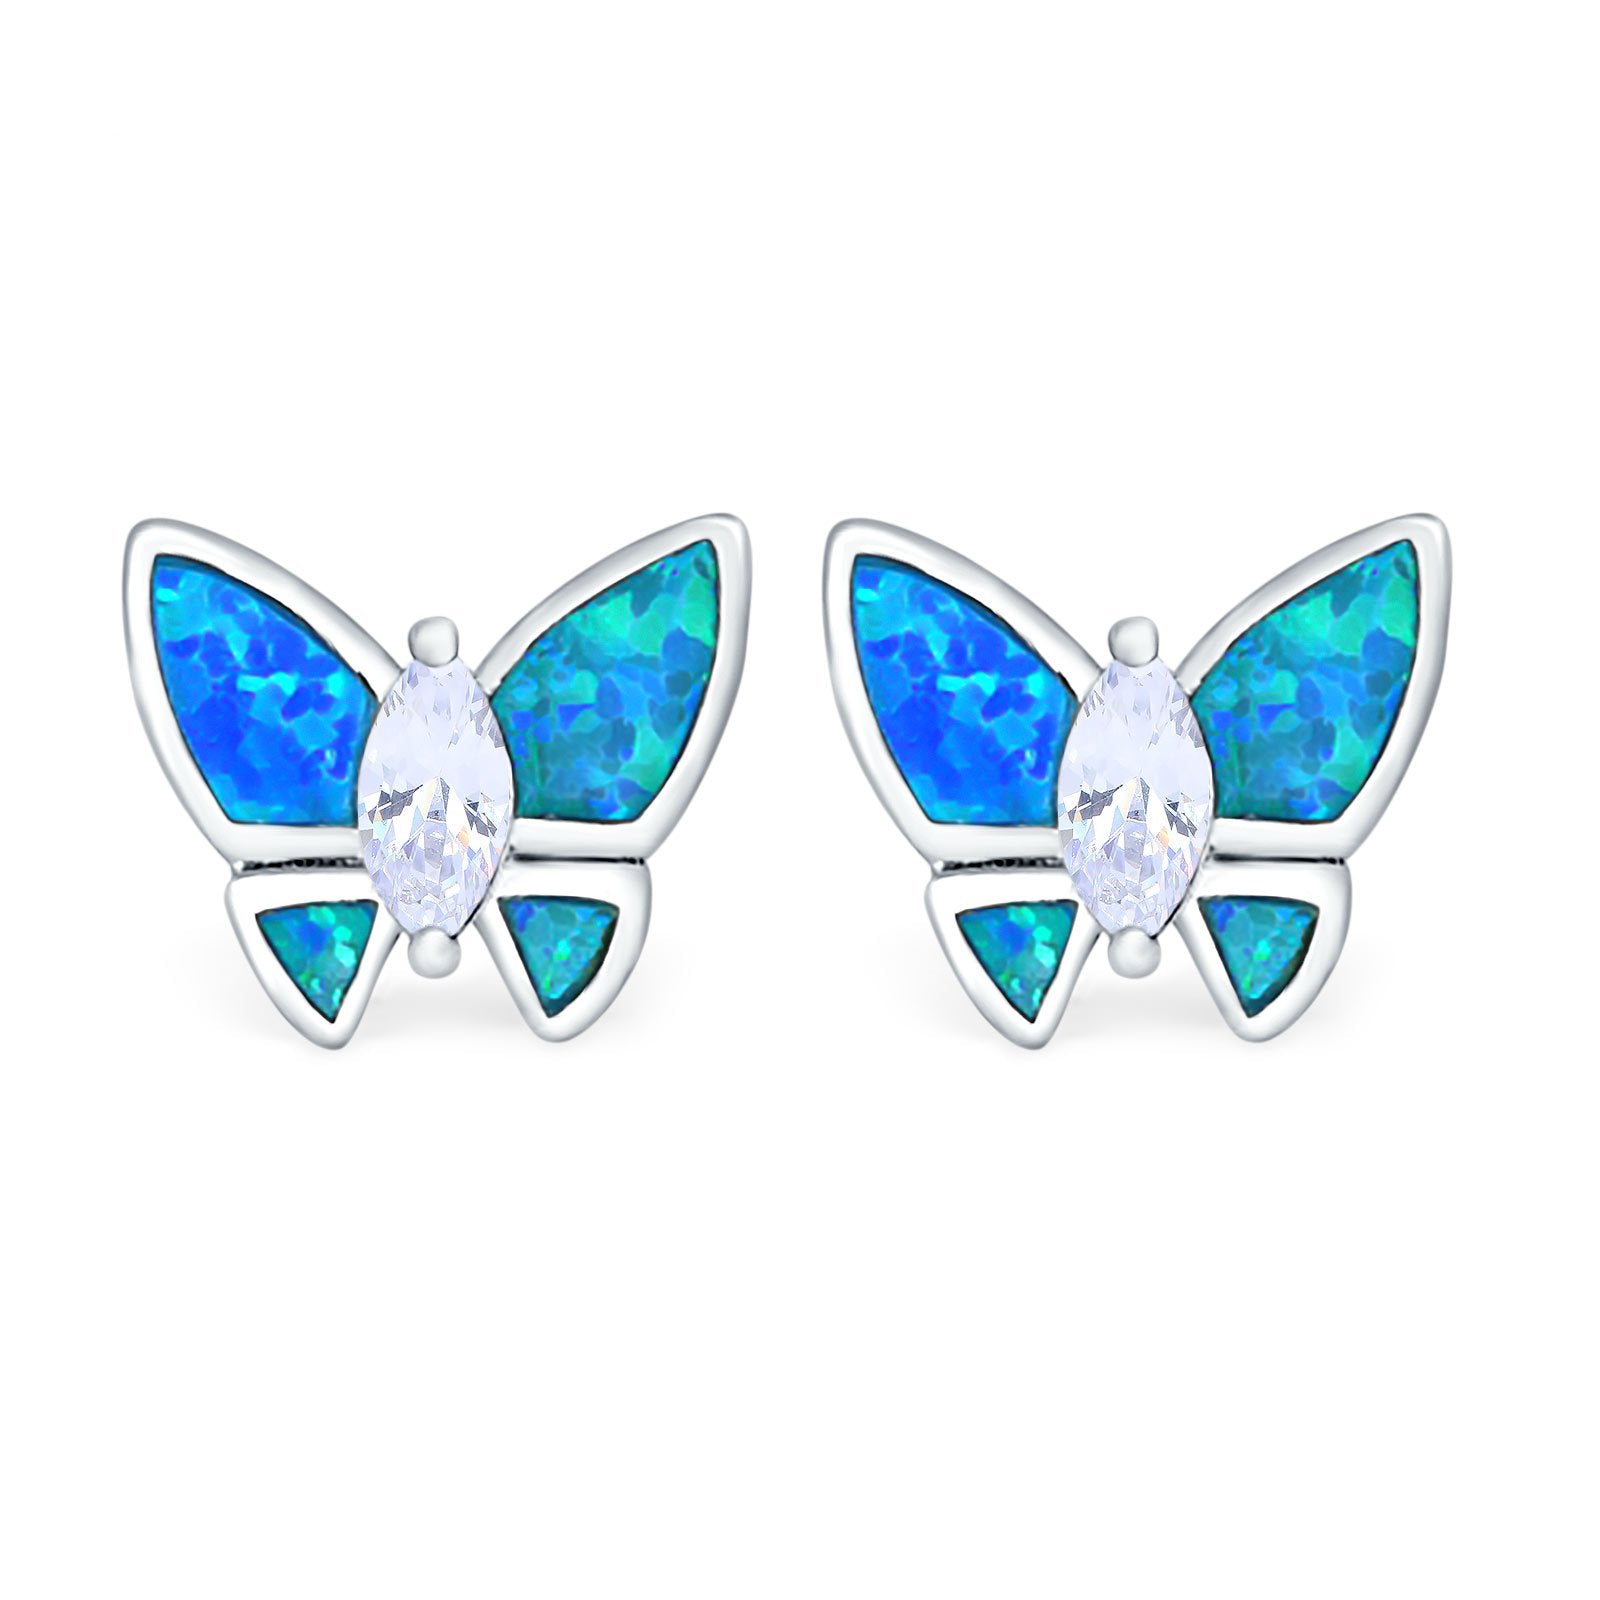 Butterfly Stud Earrings Created Opal Simulated CZ 925 Sterling Silver (8mm)